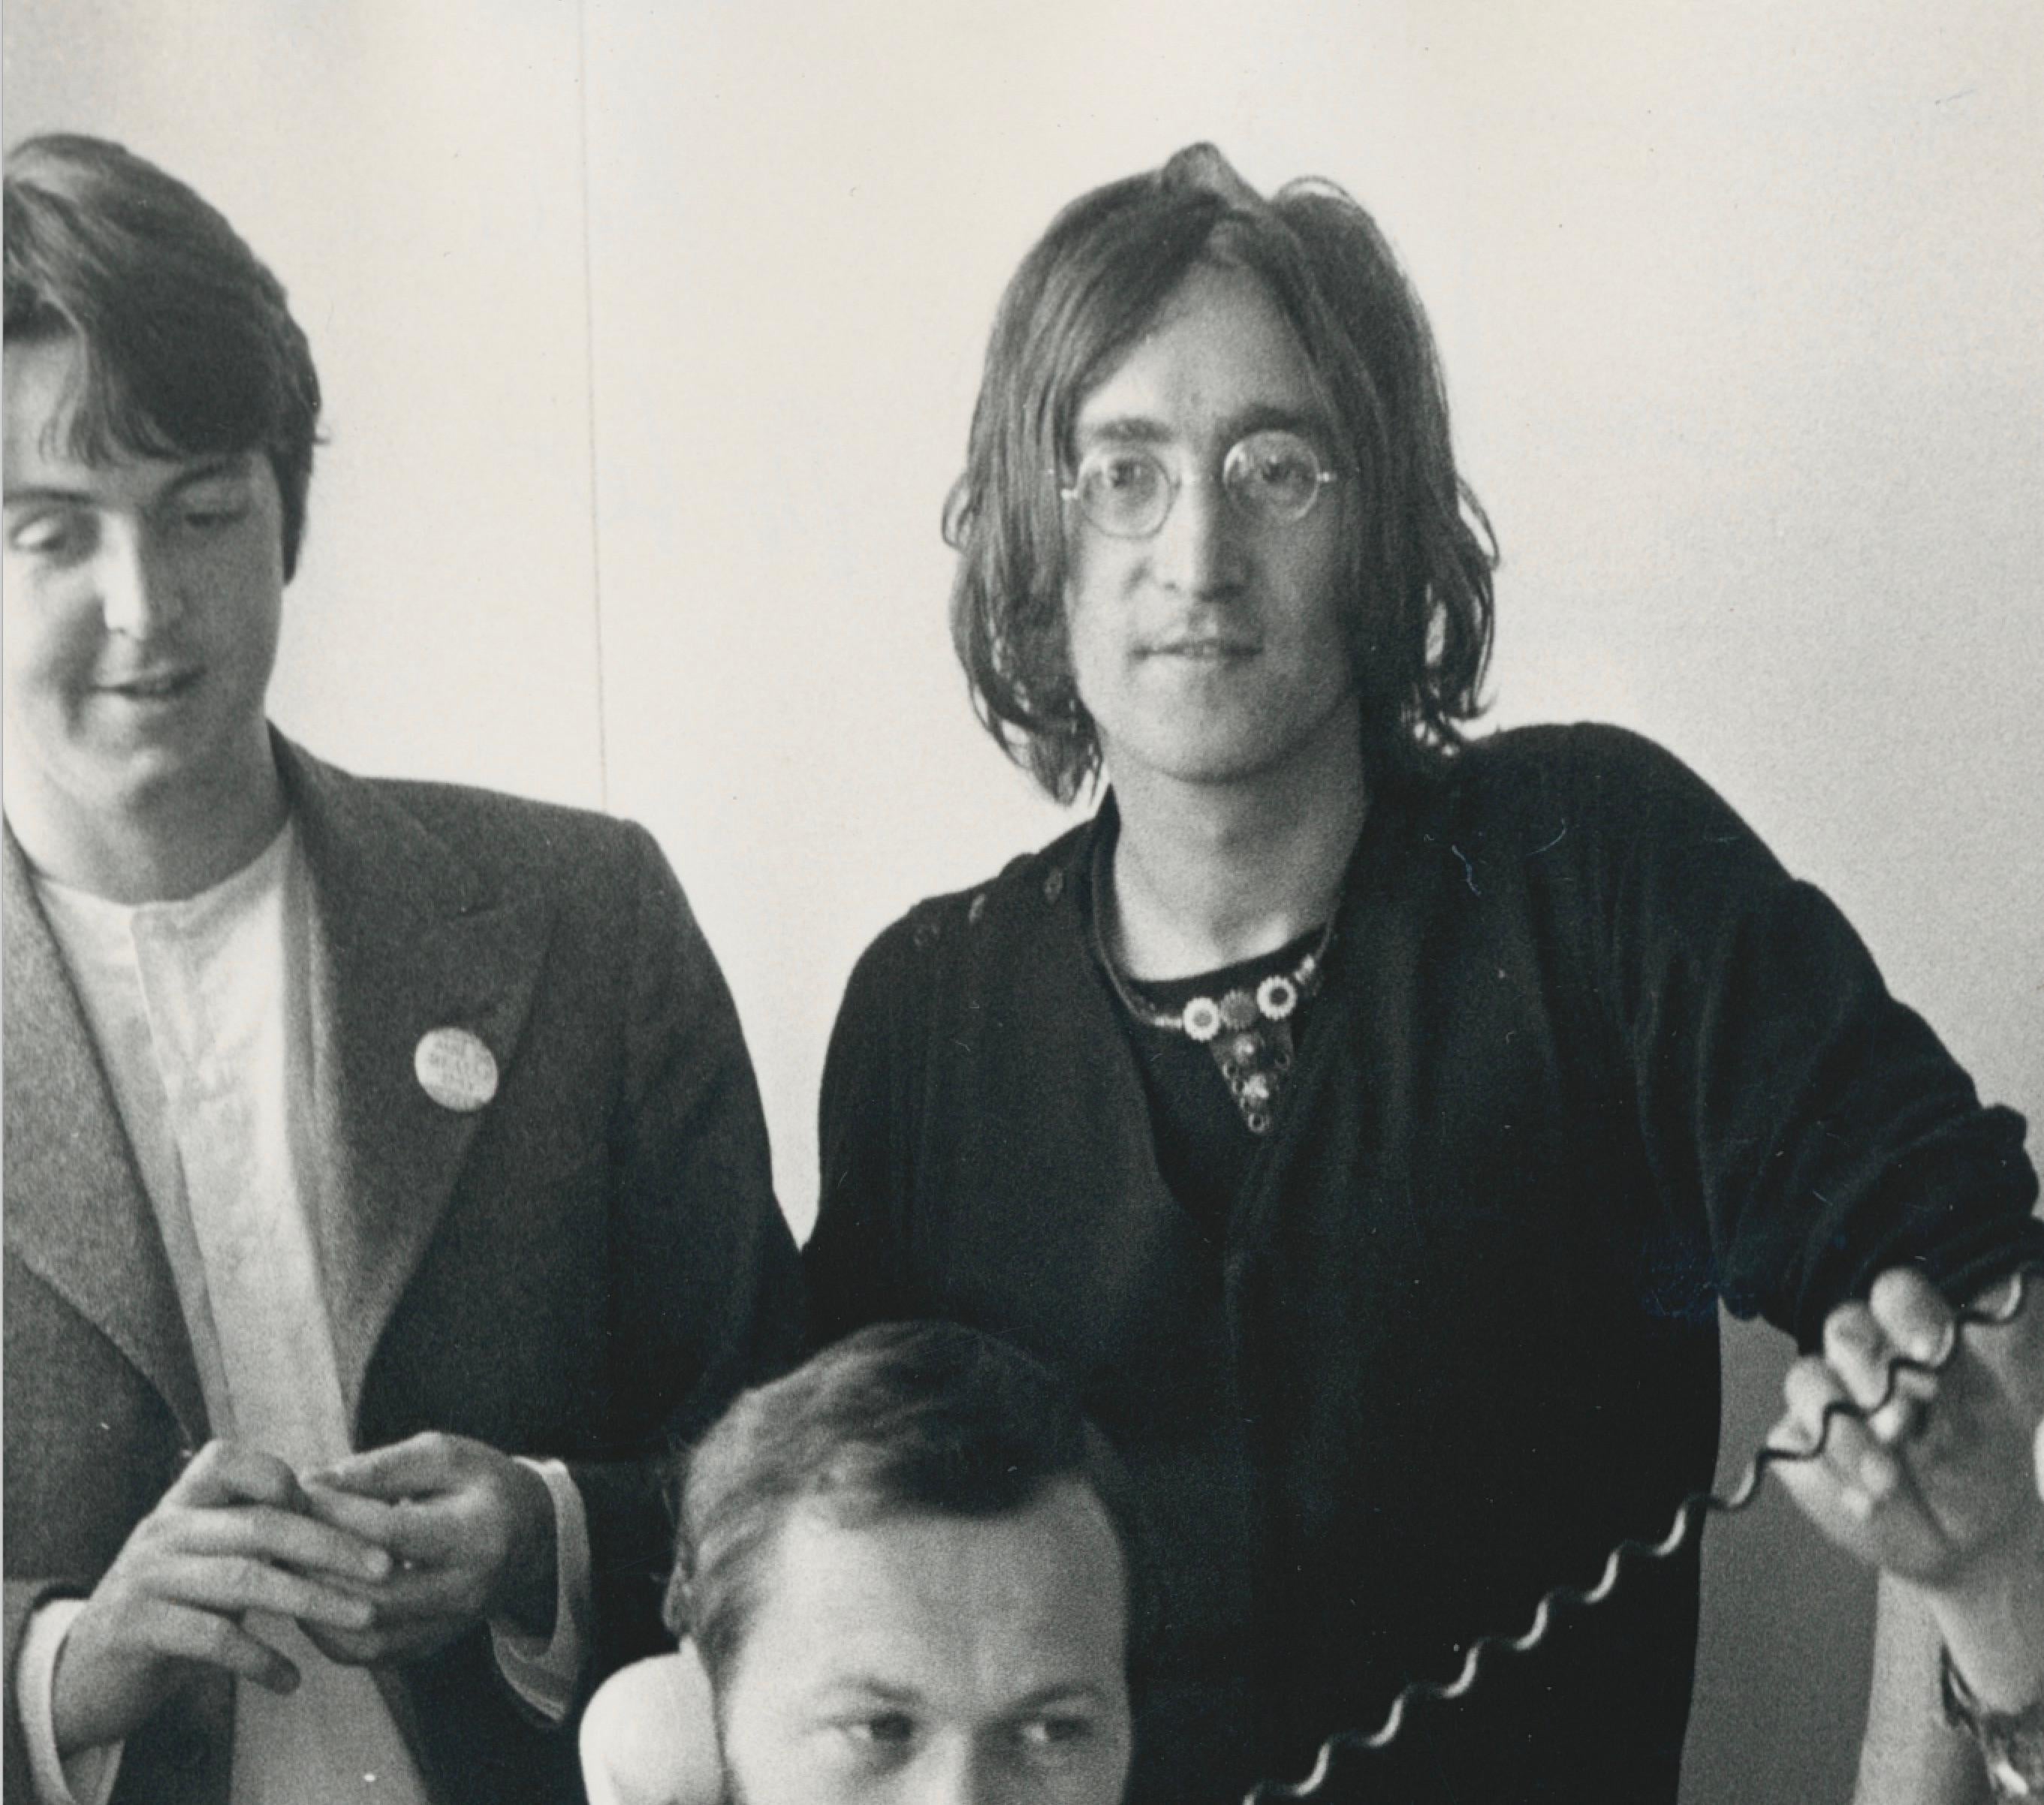 The Beatles, Office, Black and White Photography, 20, 7 x 25, 4 cm - Gray Portrait Photograph by Unknown